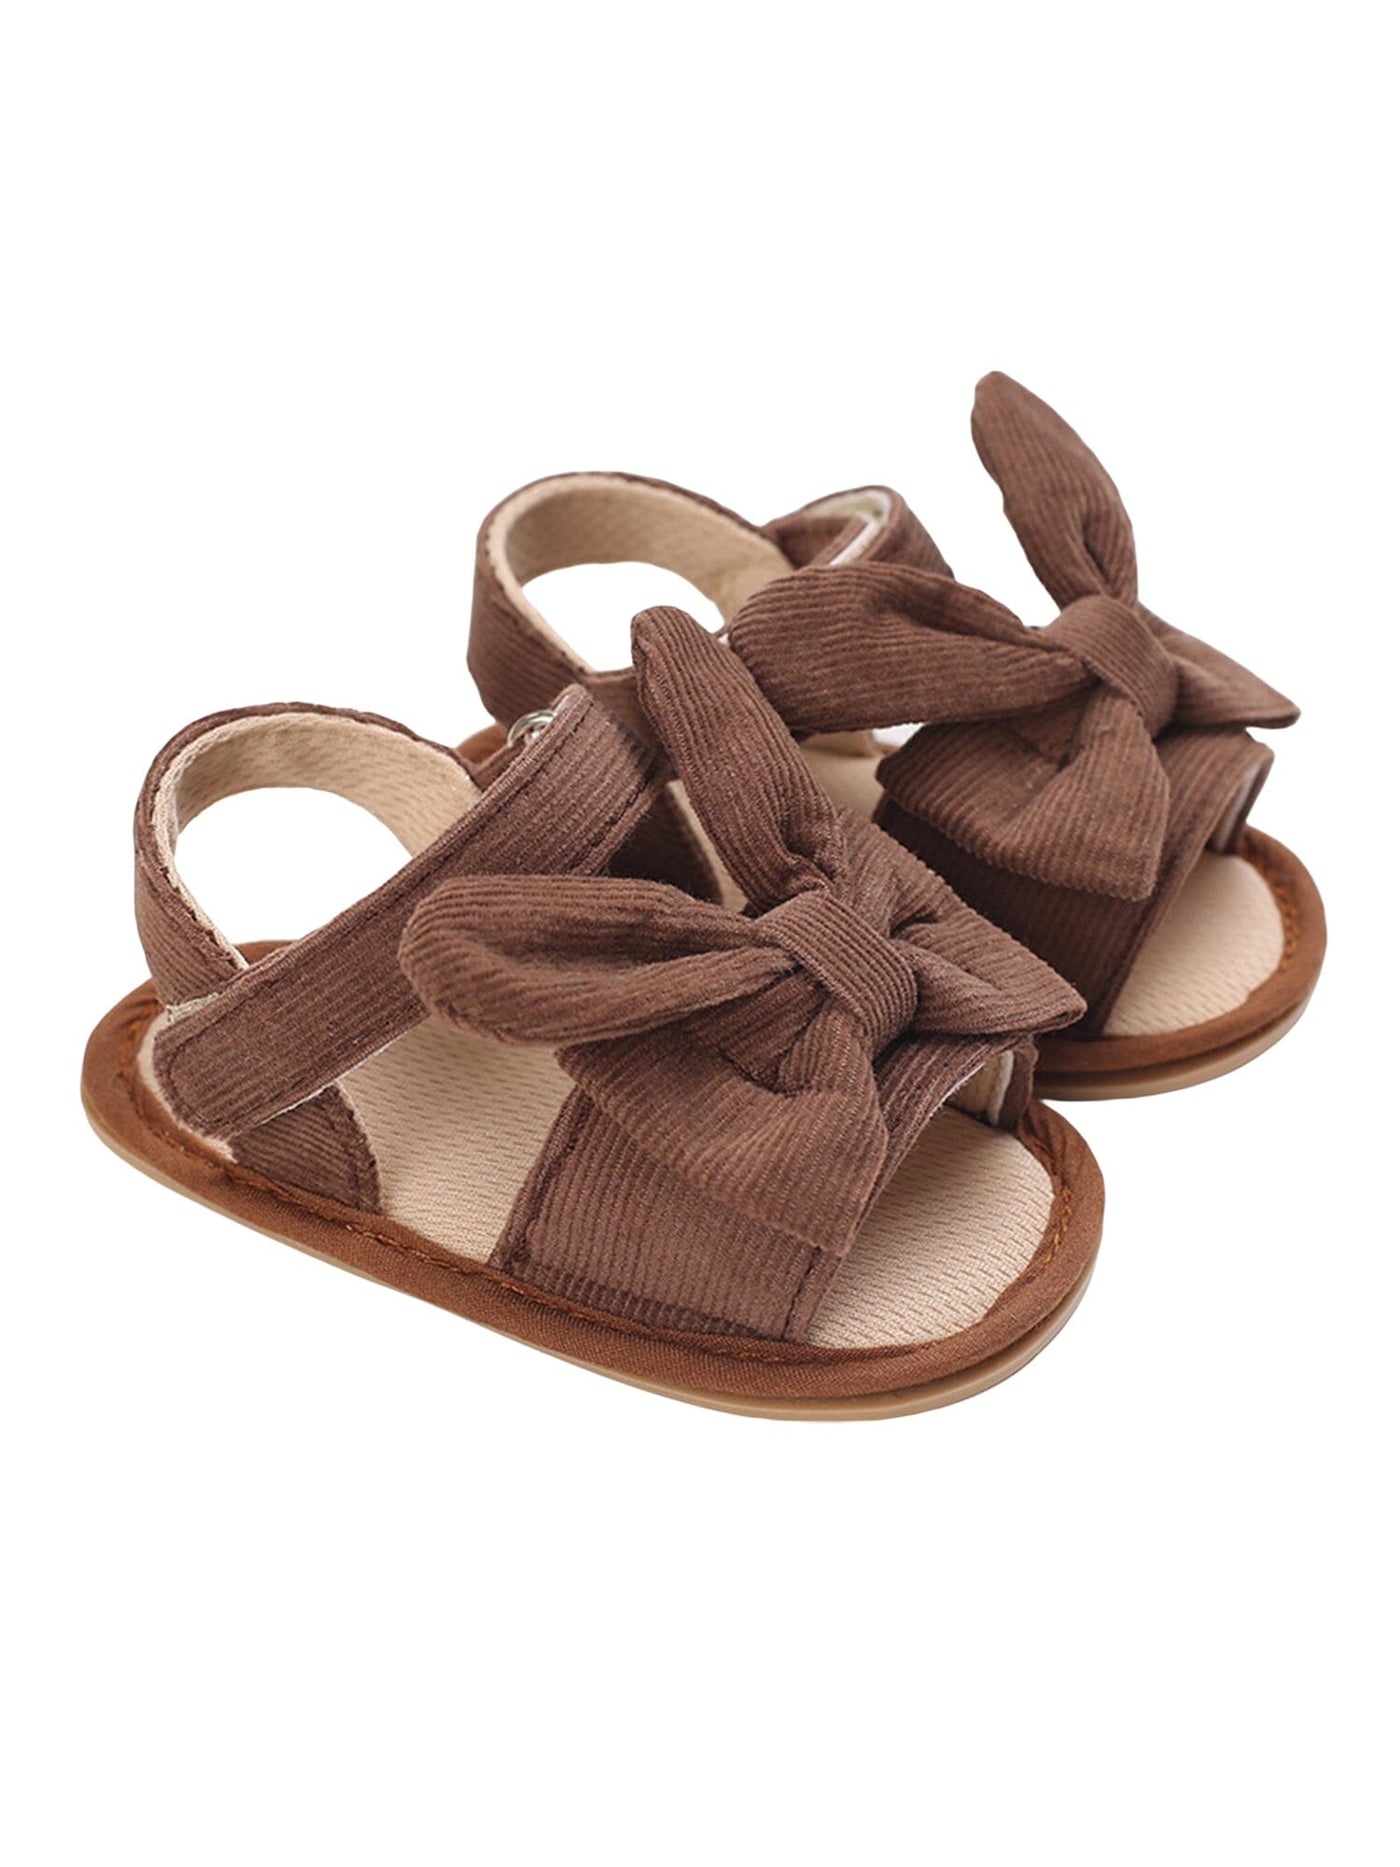 Baby Girl Bowknot Ankle Strap Sandals Shoes Iluvlittlepeople 